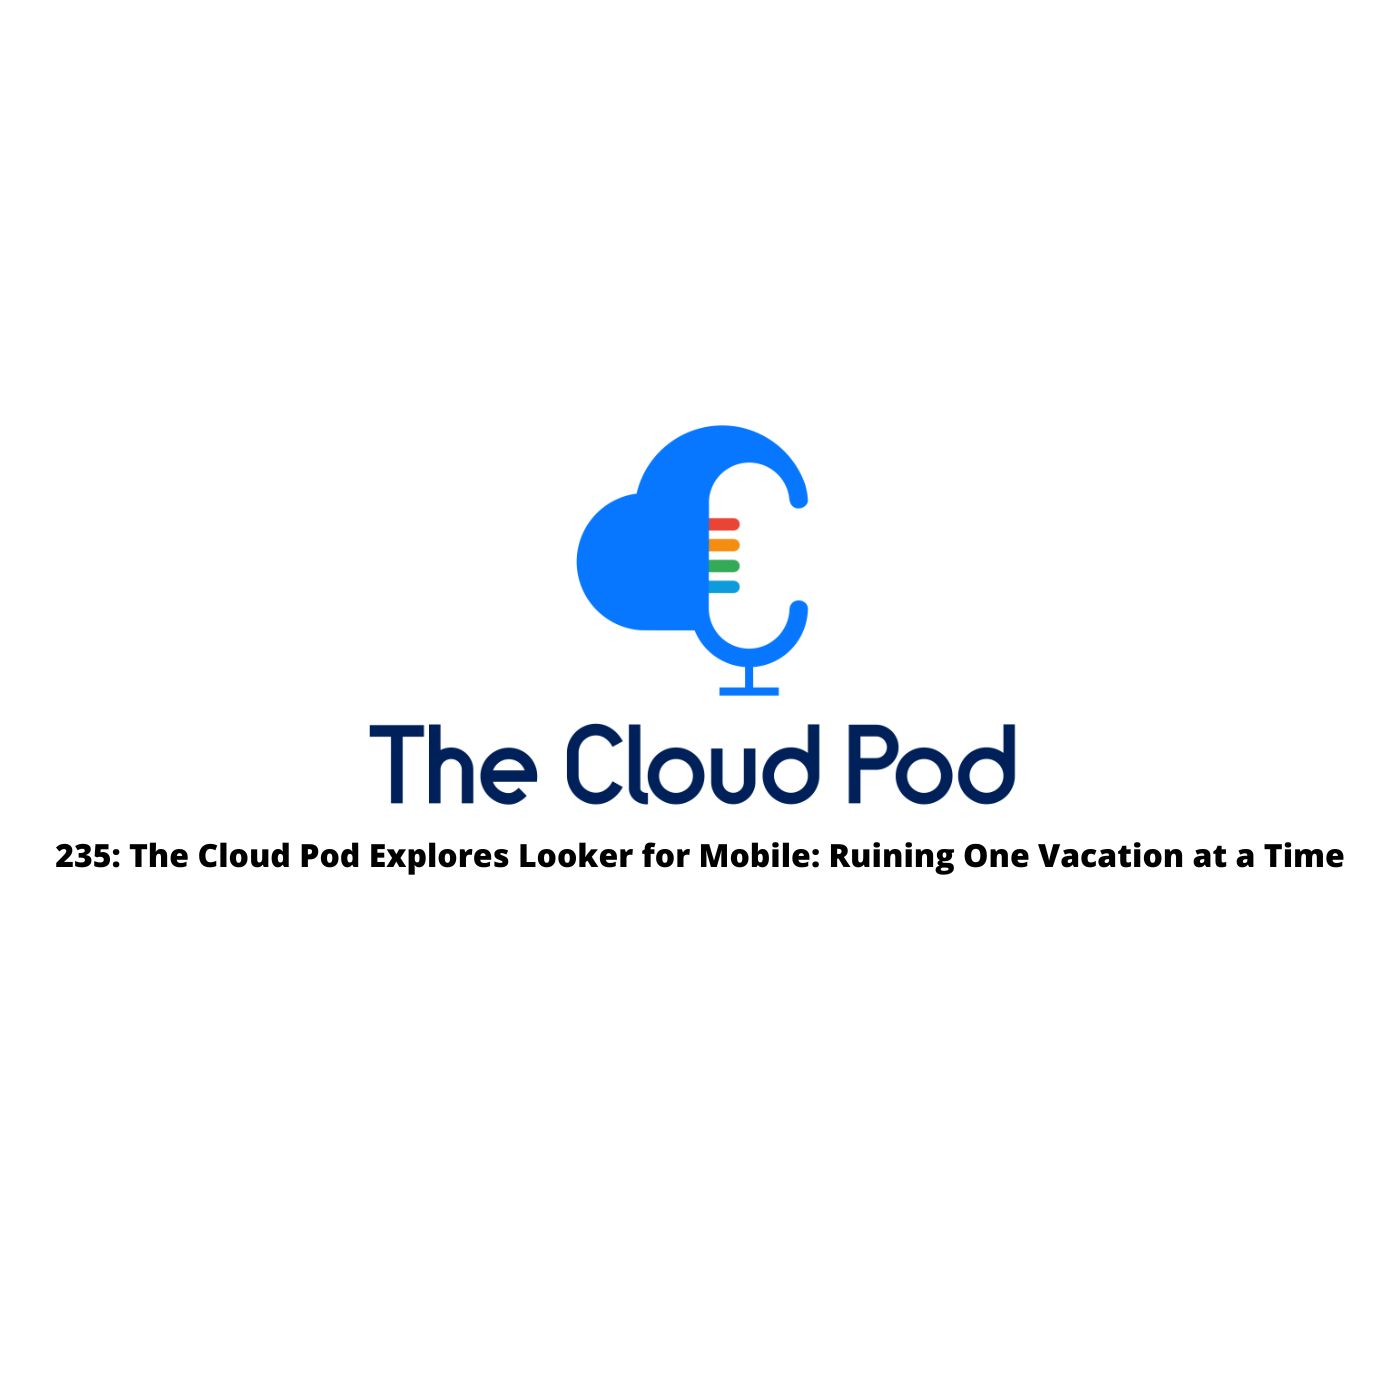 235: The Cloud Pod Explores Looker for Mobile: Ruining One Vacation at a Time